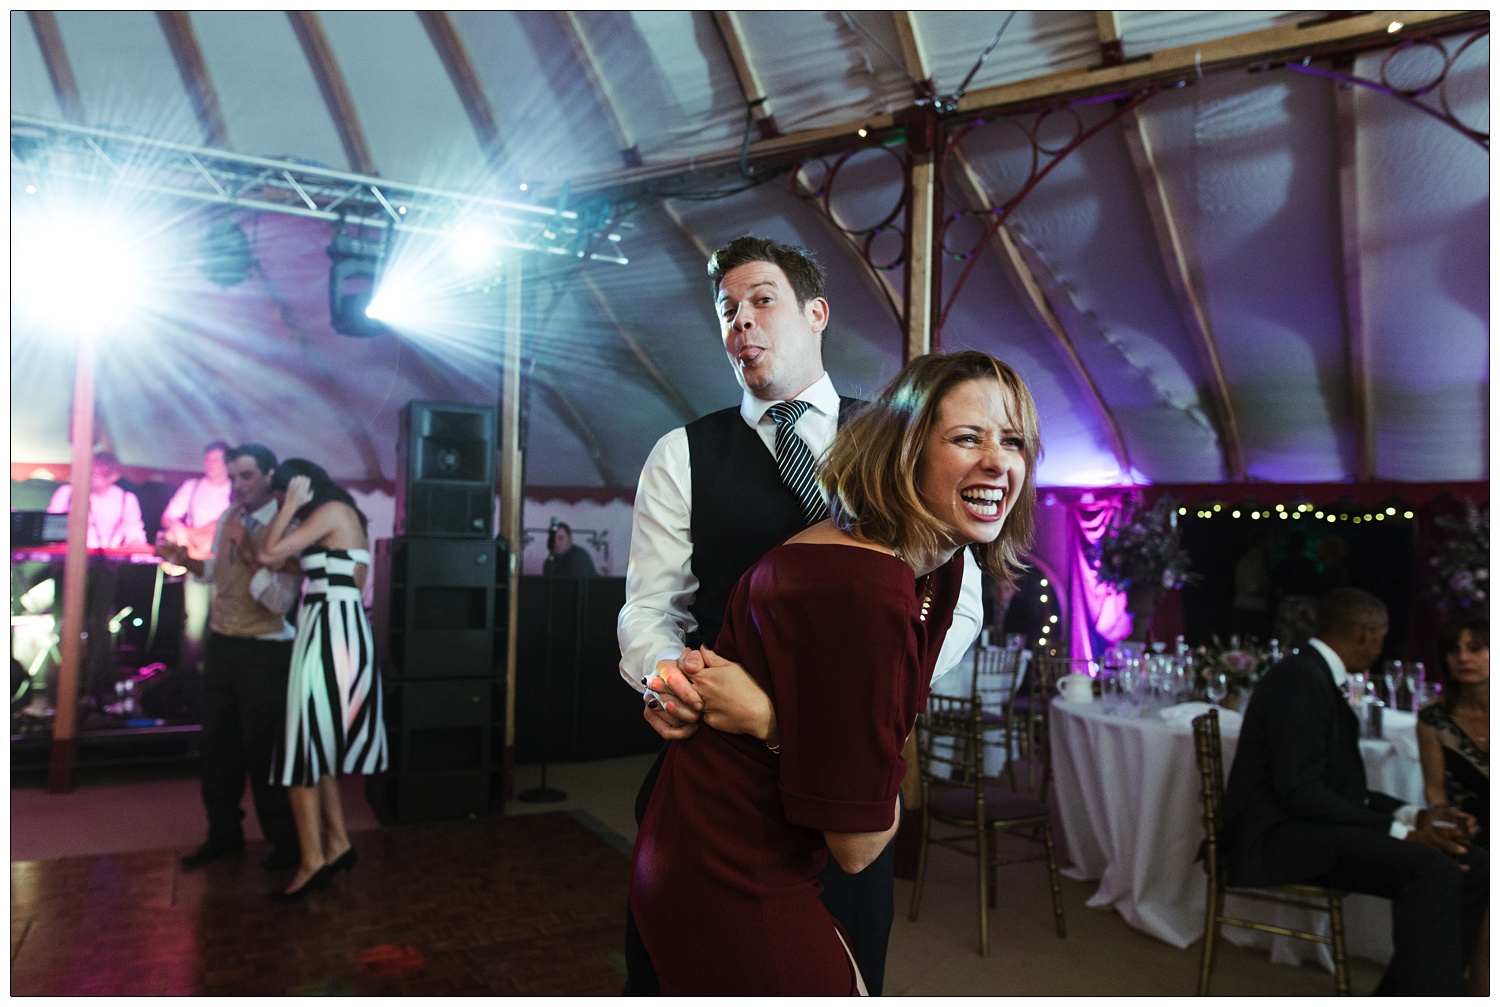 A man and a woman are dancing and the man is sticking out his tongue at the camera.